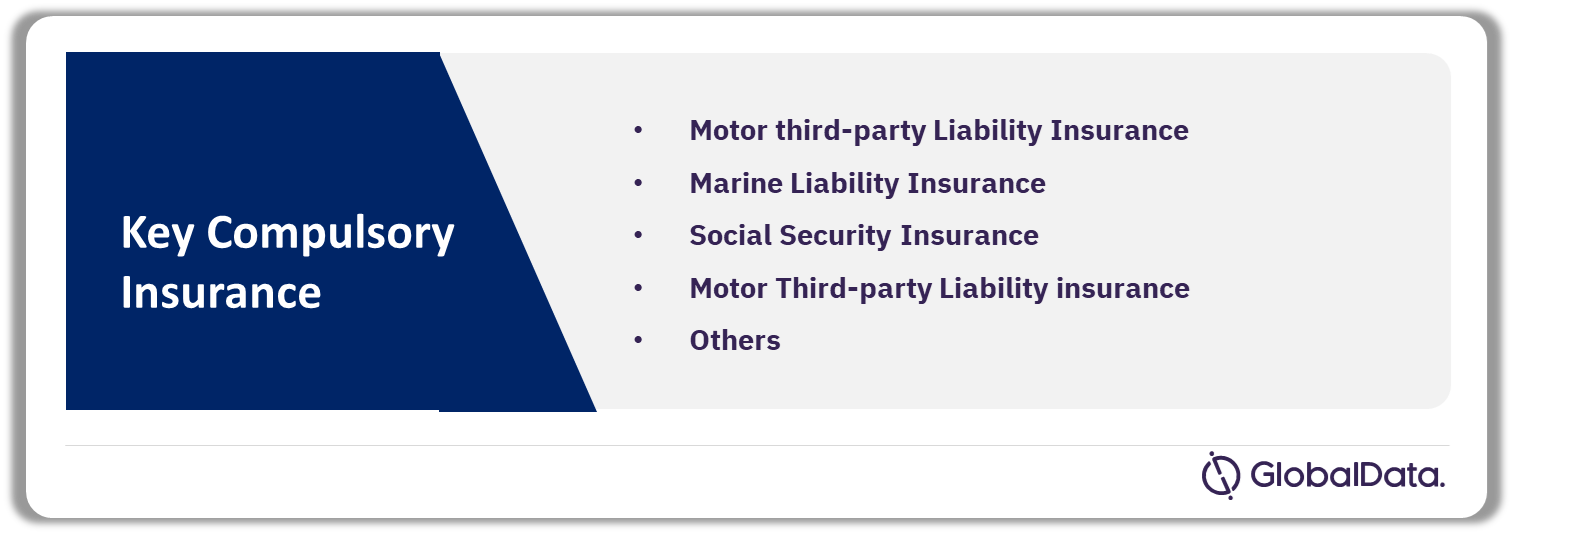 Togo Insurance Industry Analysis by Compulsory Insurances